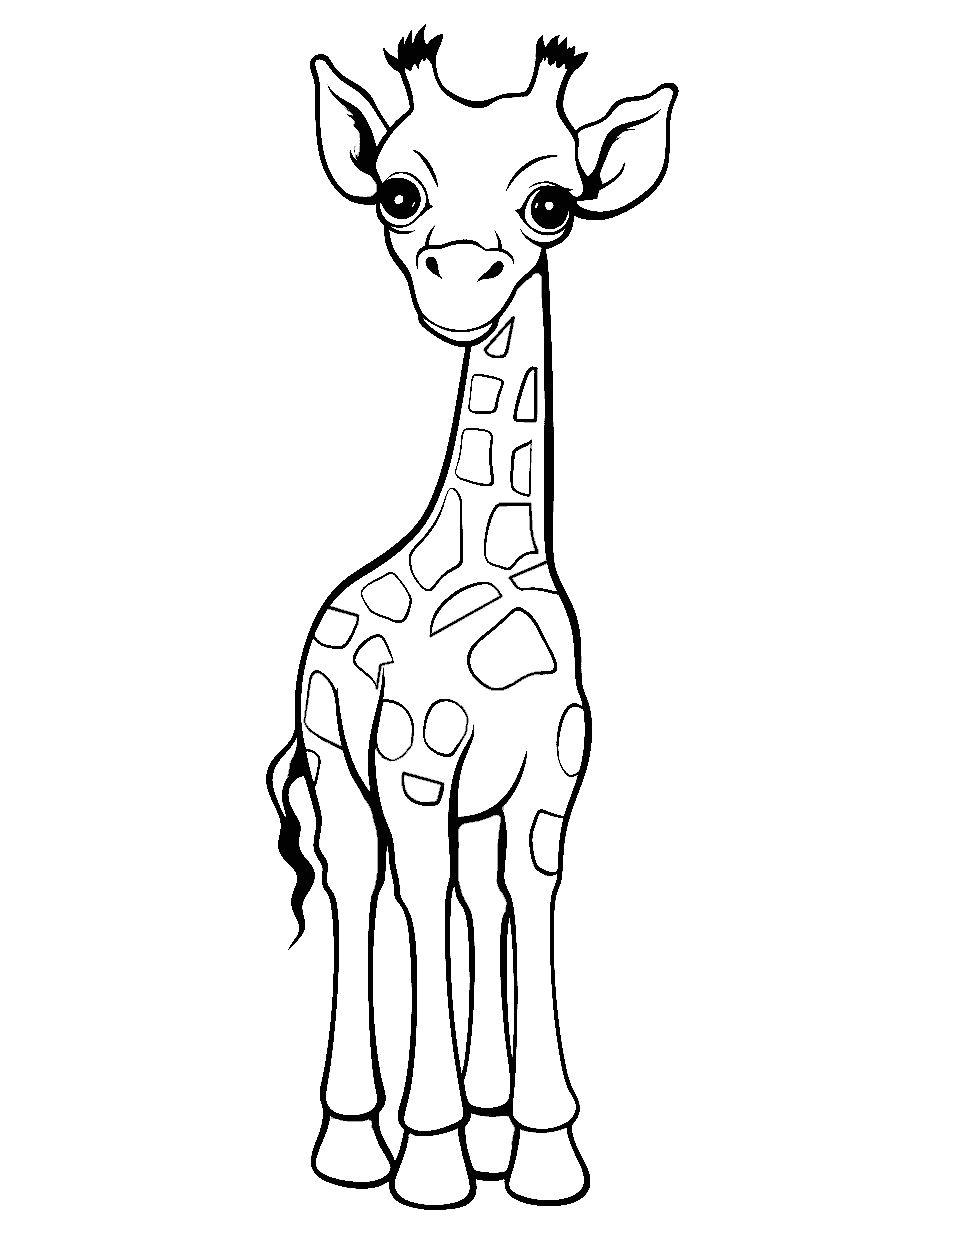 Giraffe coloring pages free printable sheets